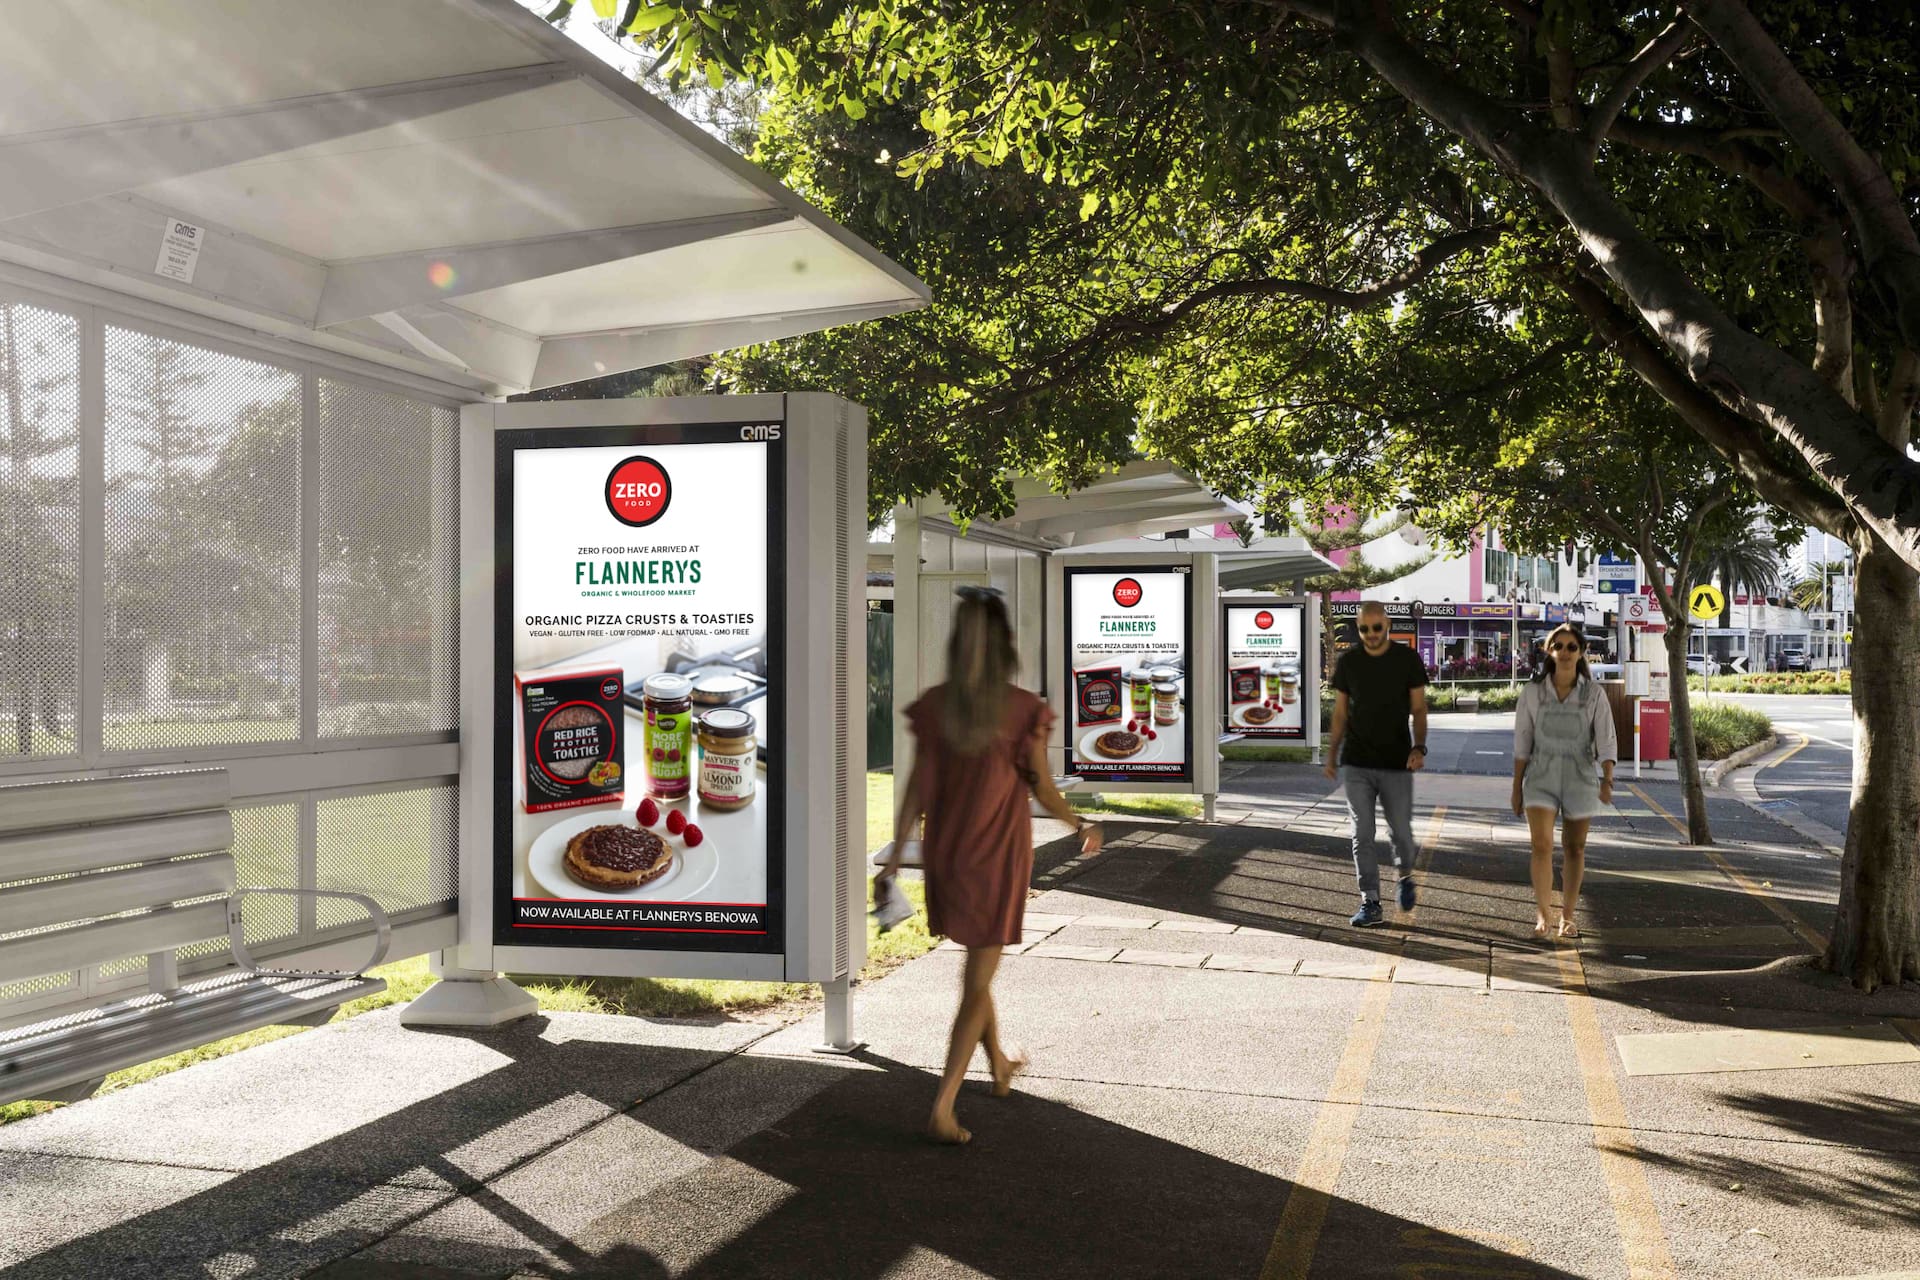 Graphic Design for Zero Superfoods, Designed by Spacey Studios. Bus Shelter to promote products in Flannery's grocery stores in Gold Coast, Queensland, Australia.